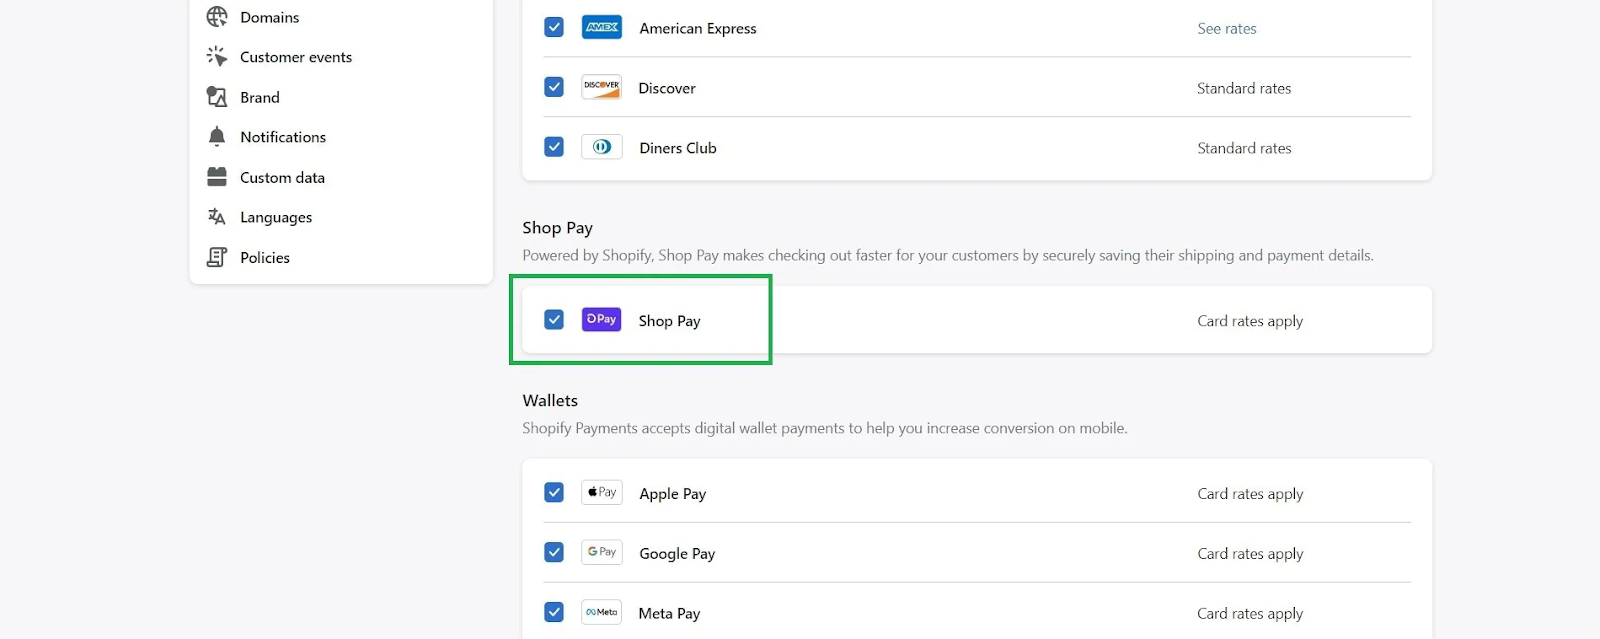 Delete Shop Pay Account on Shopify